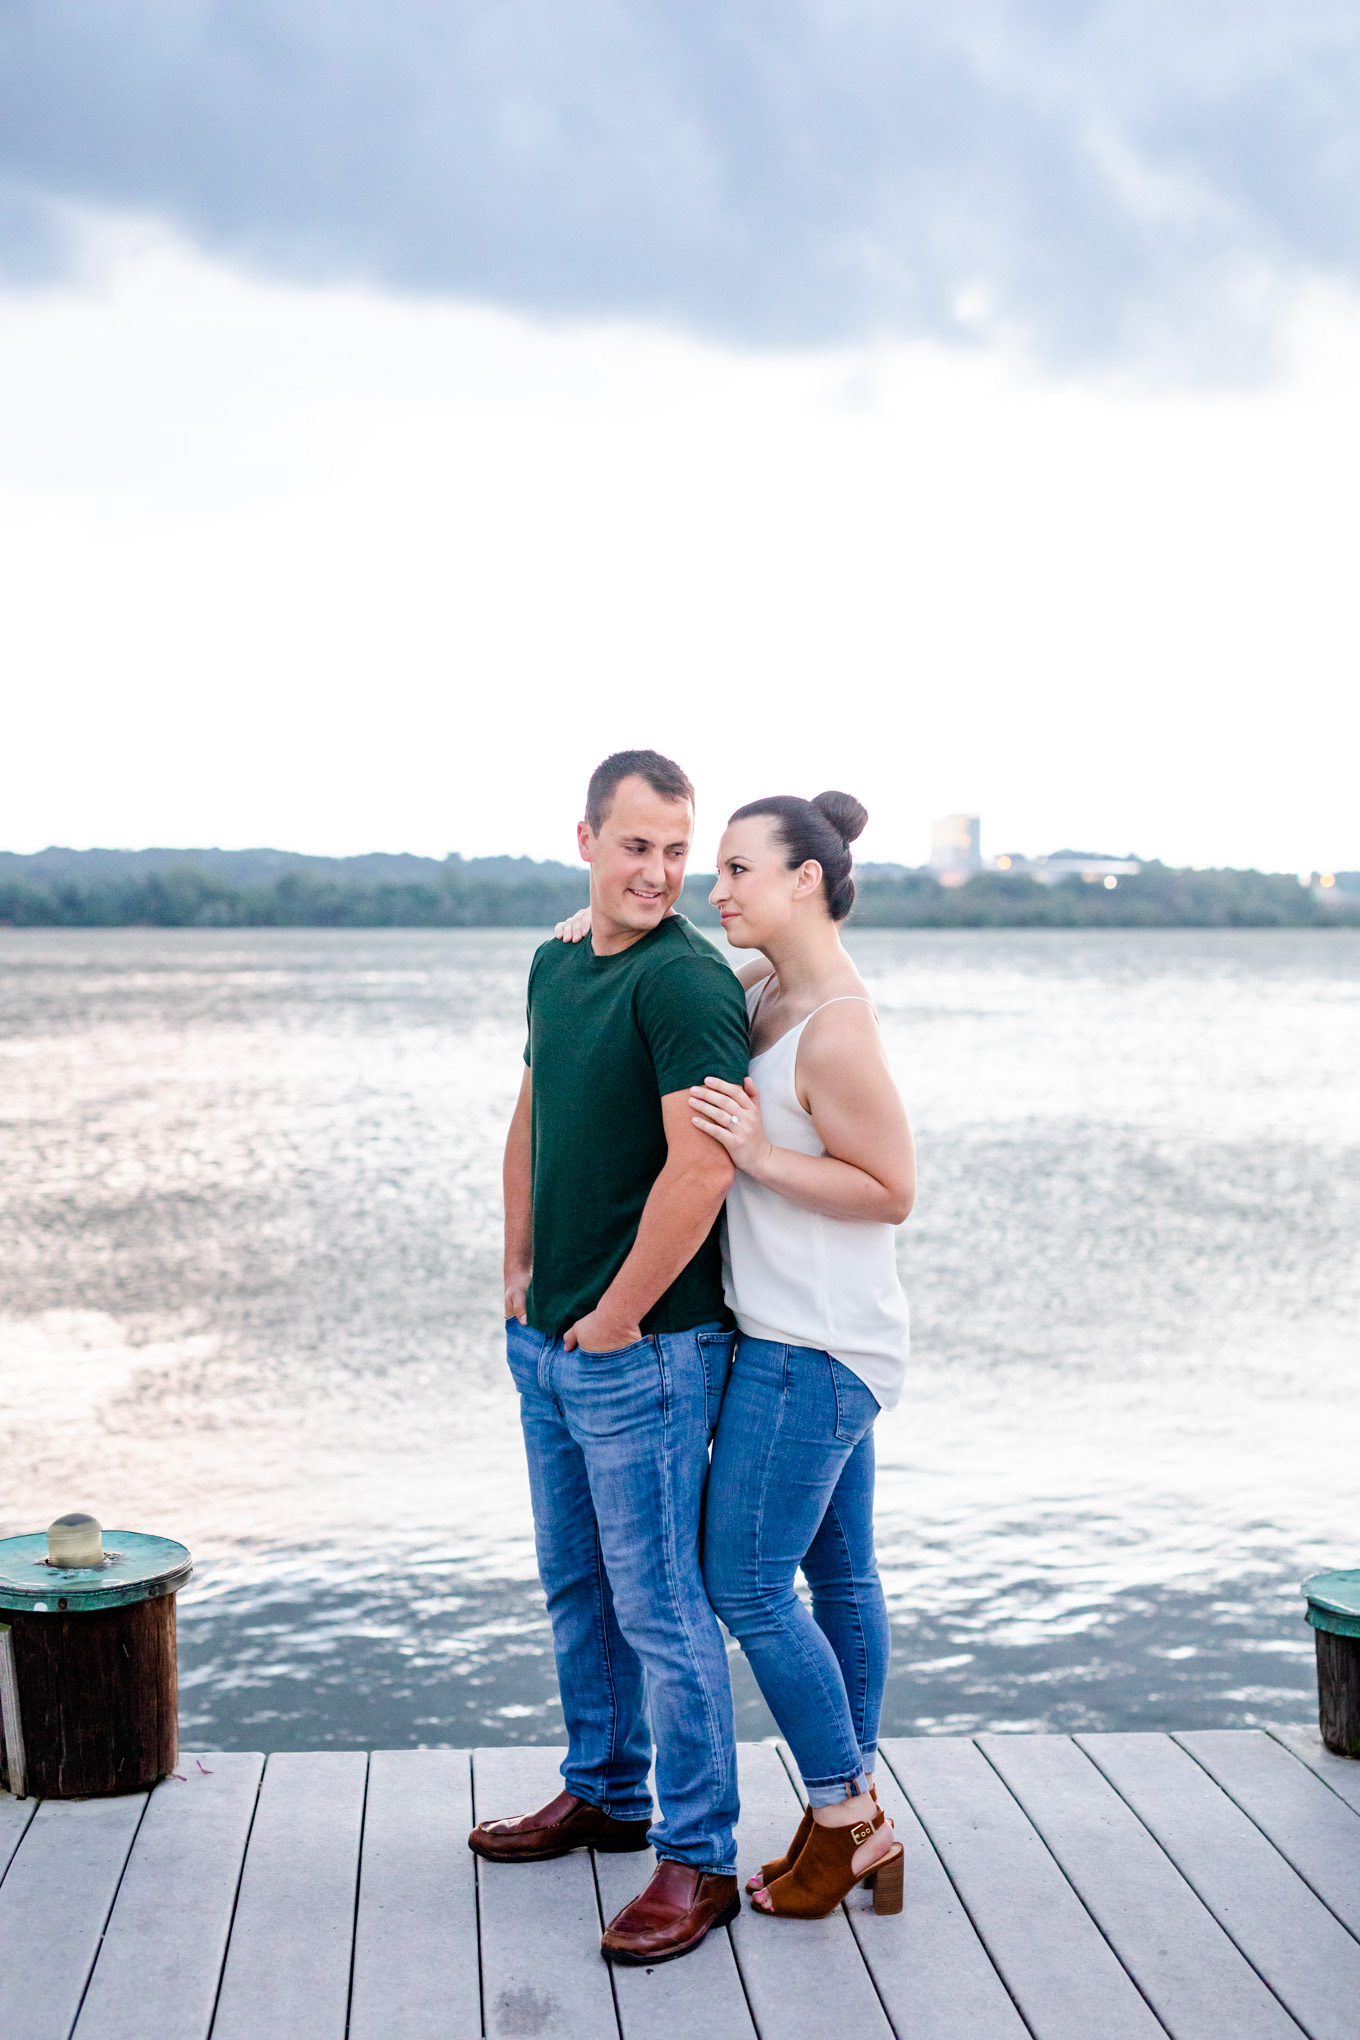 Carlyle House engagement photos, Carlyle House, Alexandria engagement photos, Old Town Alexandria engagement photos, Old Town Alexandria, Alexandria engagement photos, Alexandria Virginia, classic engagement photos, historic homes engagement photos, casual engagement photos, Rachel E.H. Photography, romantic portraits, waterfront engagement photos